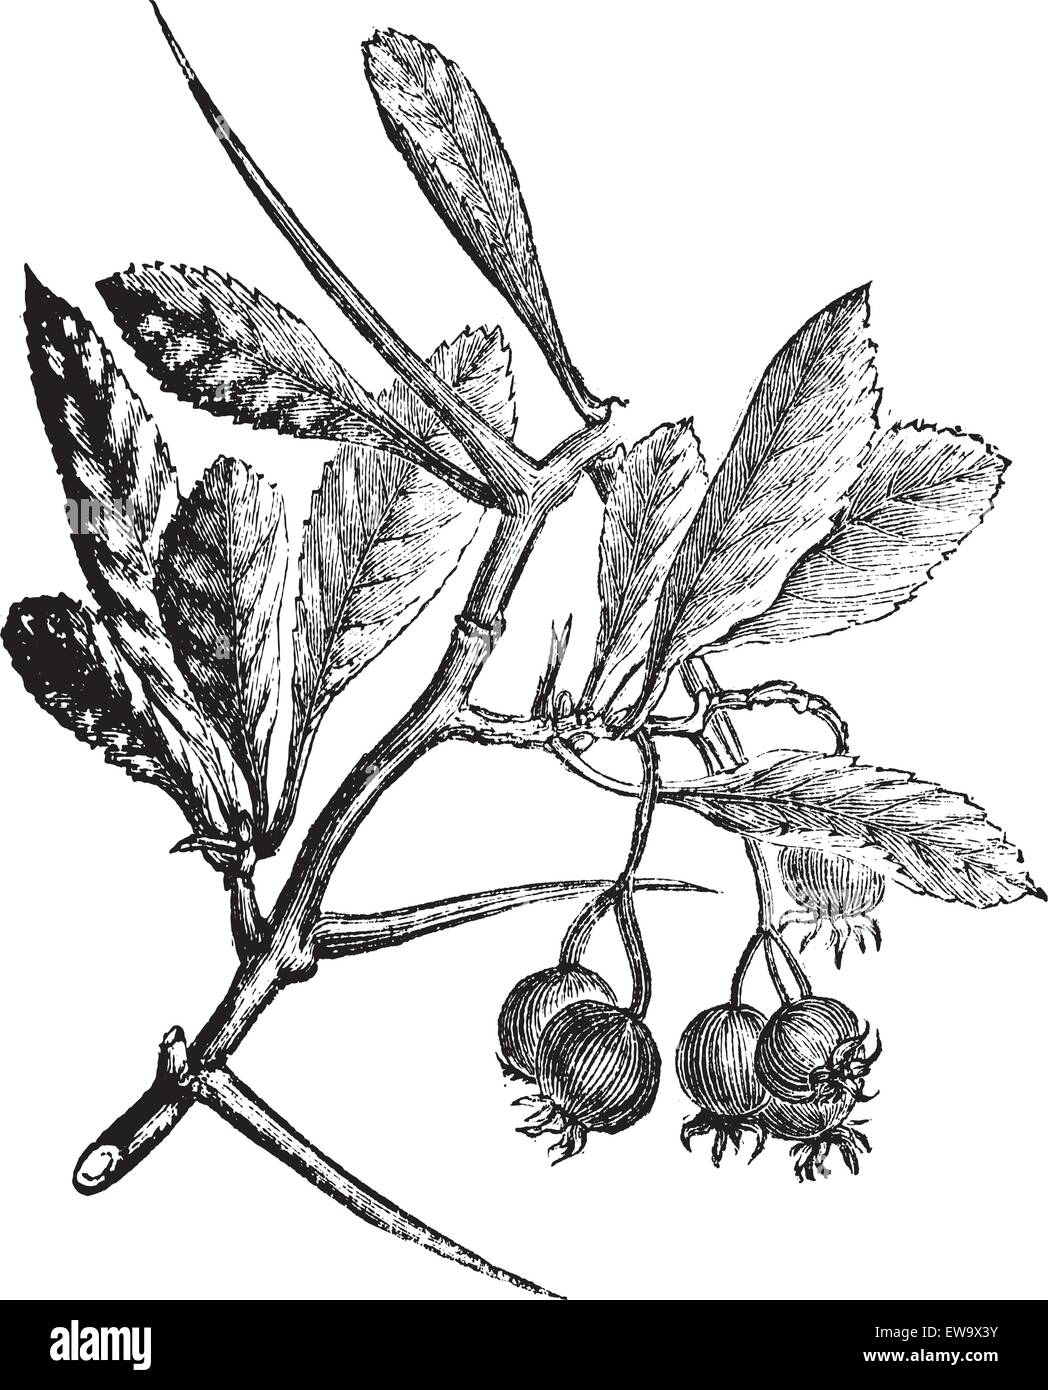 American Hawthorn or Crataegus crus-galli vintage engraving. Old engraved illustration. Also called cockspur hawthorn and cockspur thorn. Stock Vector